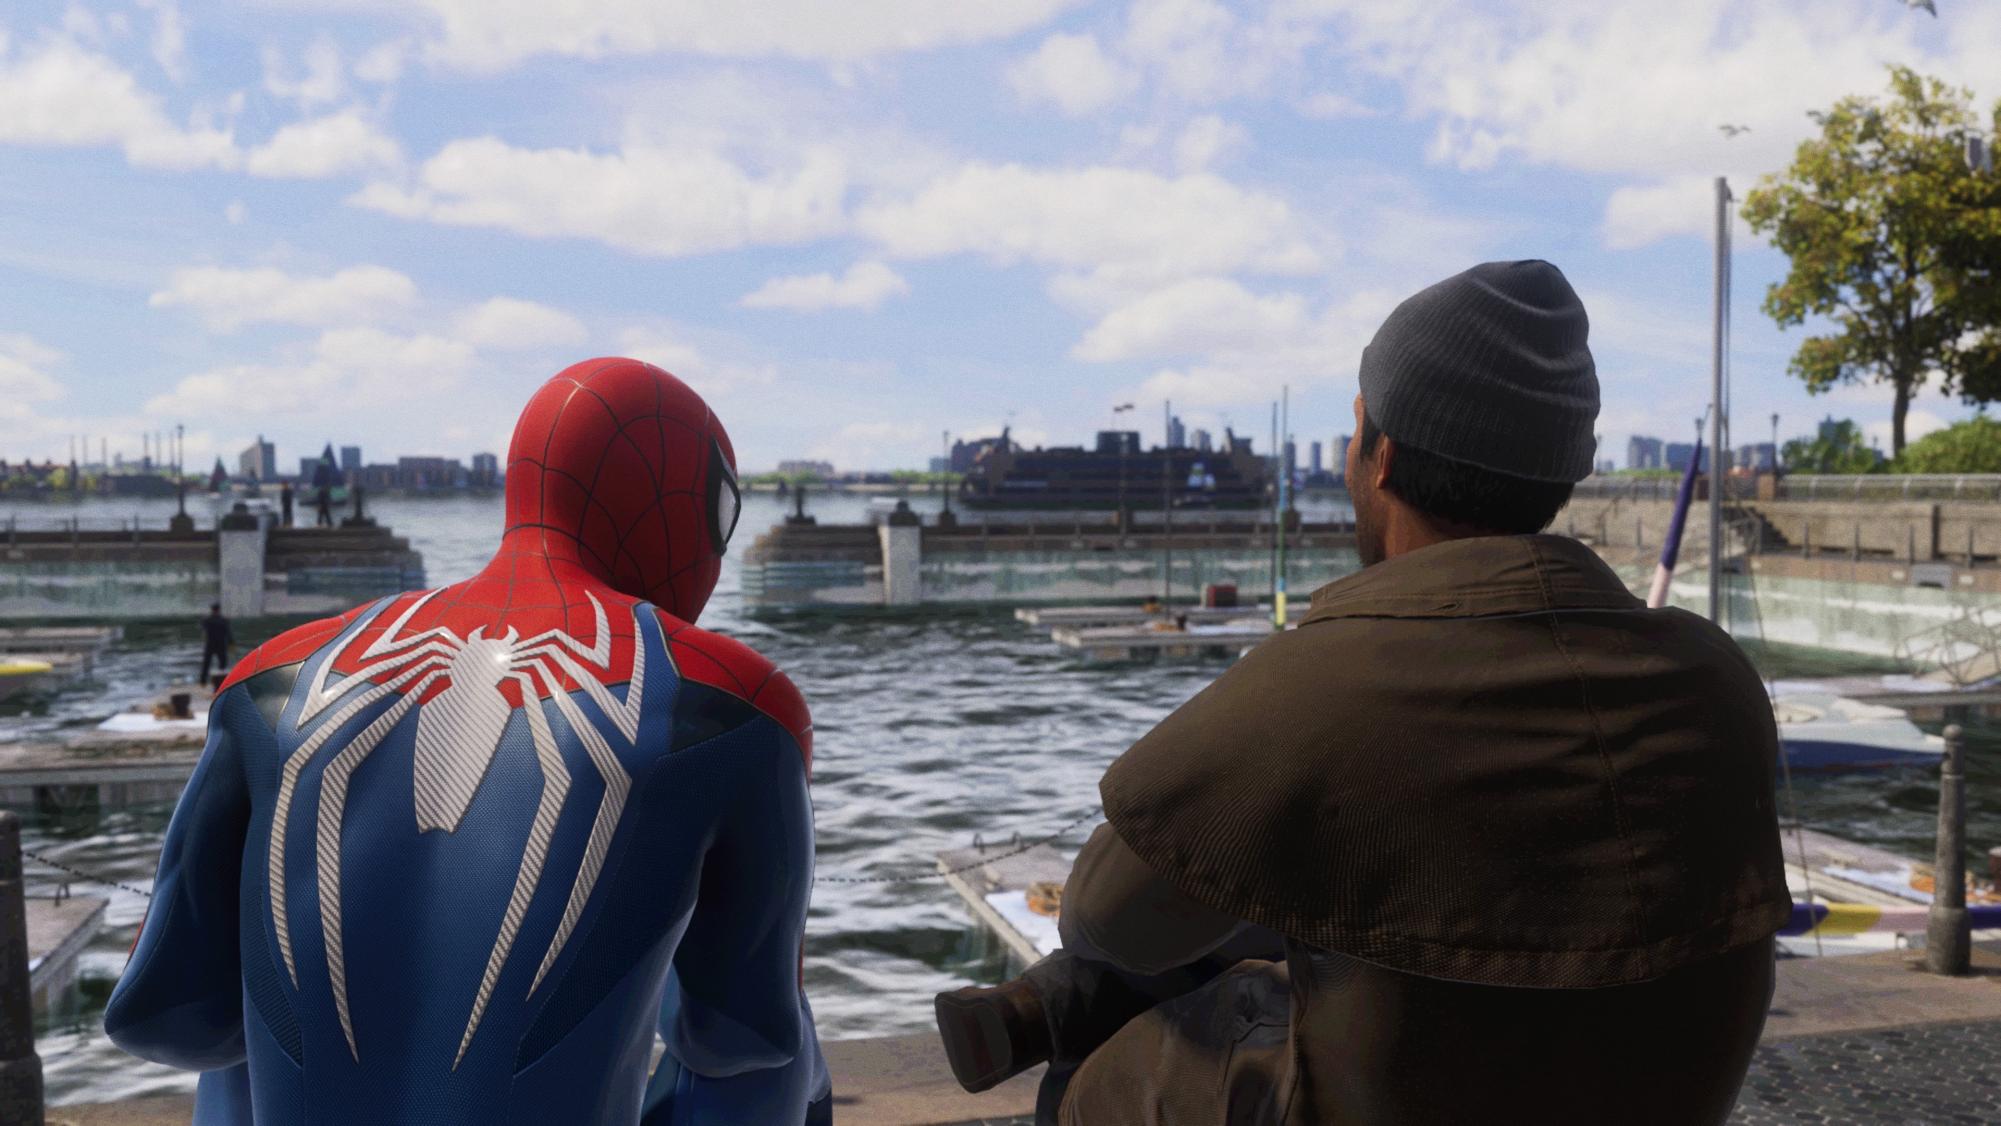 Spider-Man 2 Game Review: Greater Power, Greater Responsibility